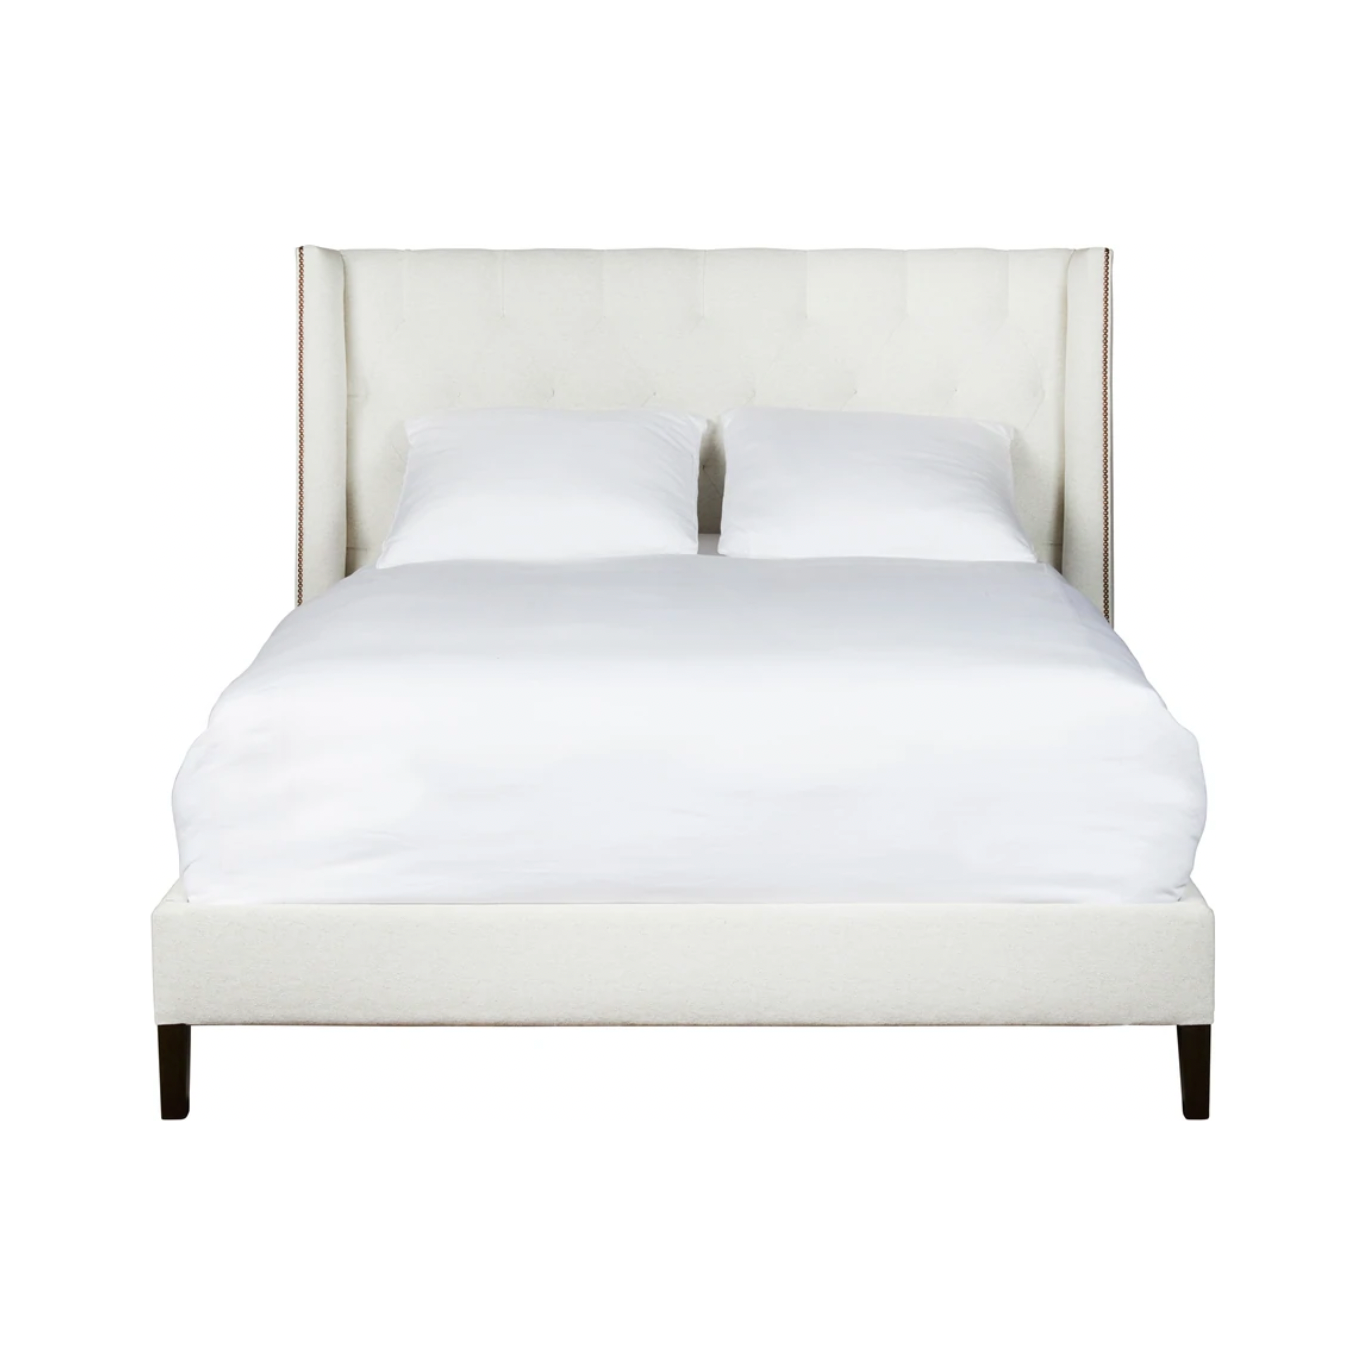 Elevate your sleep situation with this Francesca Upholstered Bed by Cisco Home. With a tall back and exposed wood legs, this will complete the look for any bedroom!Elevate your sleep situation with this Francesca Upholstered Bed by Cisco Home. With a tall back and exposed wood legs, this will complete the look for any bedroom!